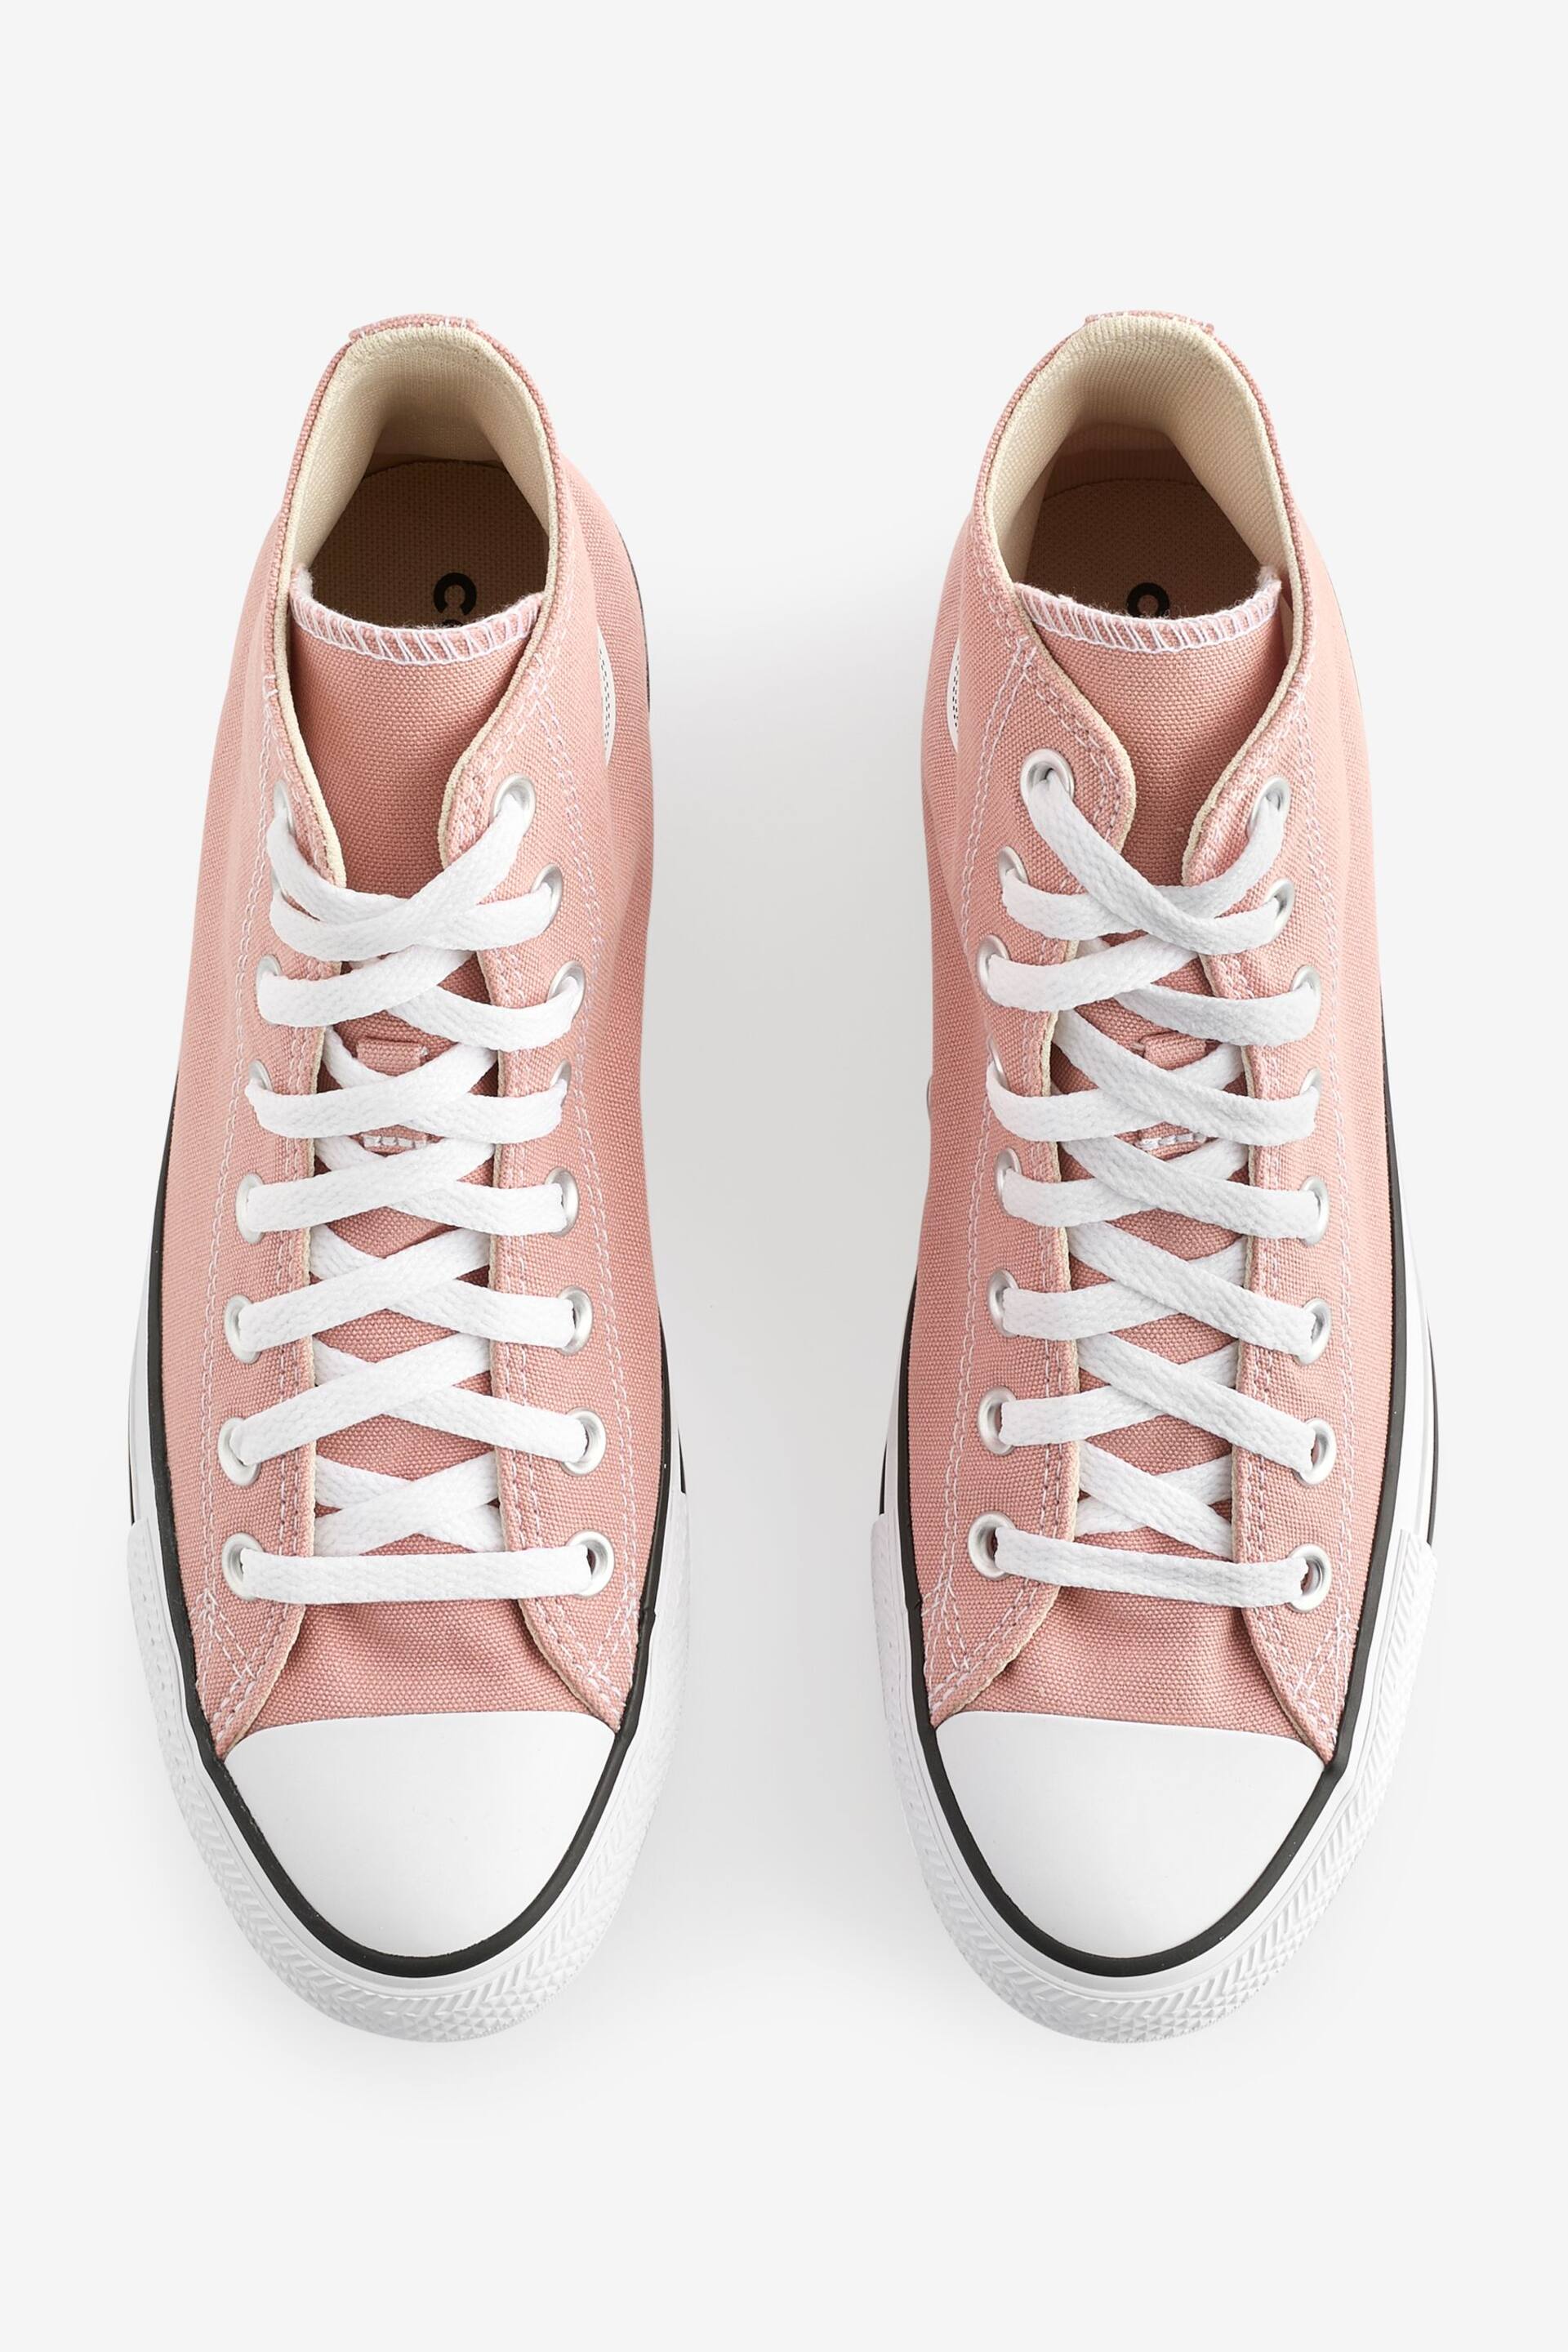 Converse Light Pink Chuck Taylor All Star High Trainers - Image 3 of 9